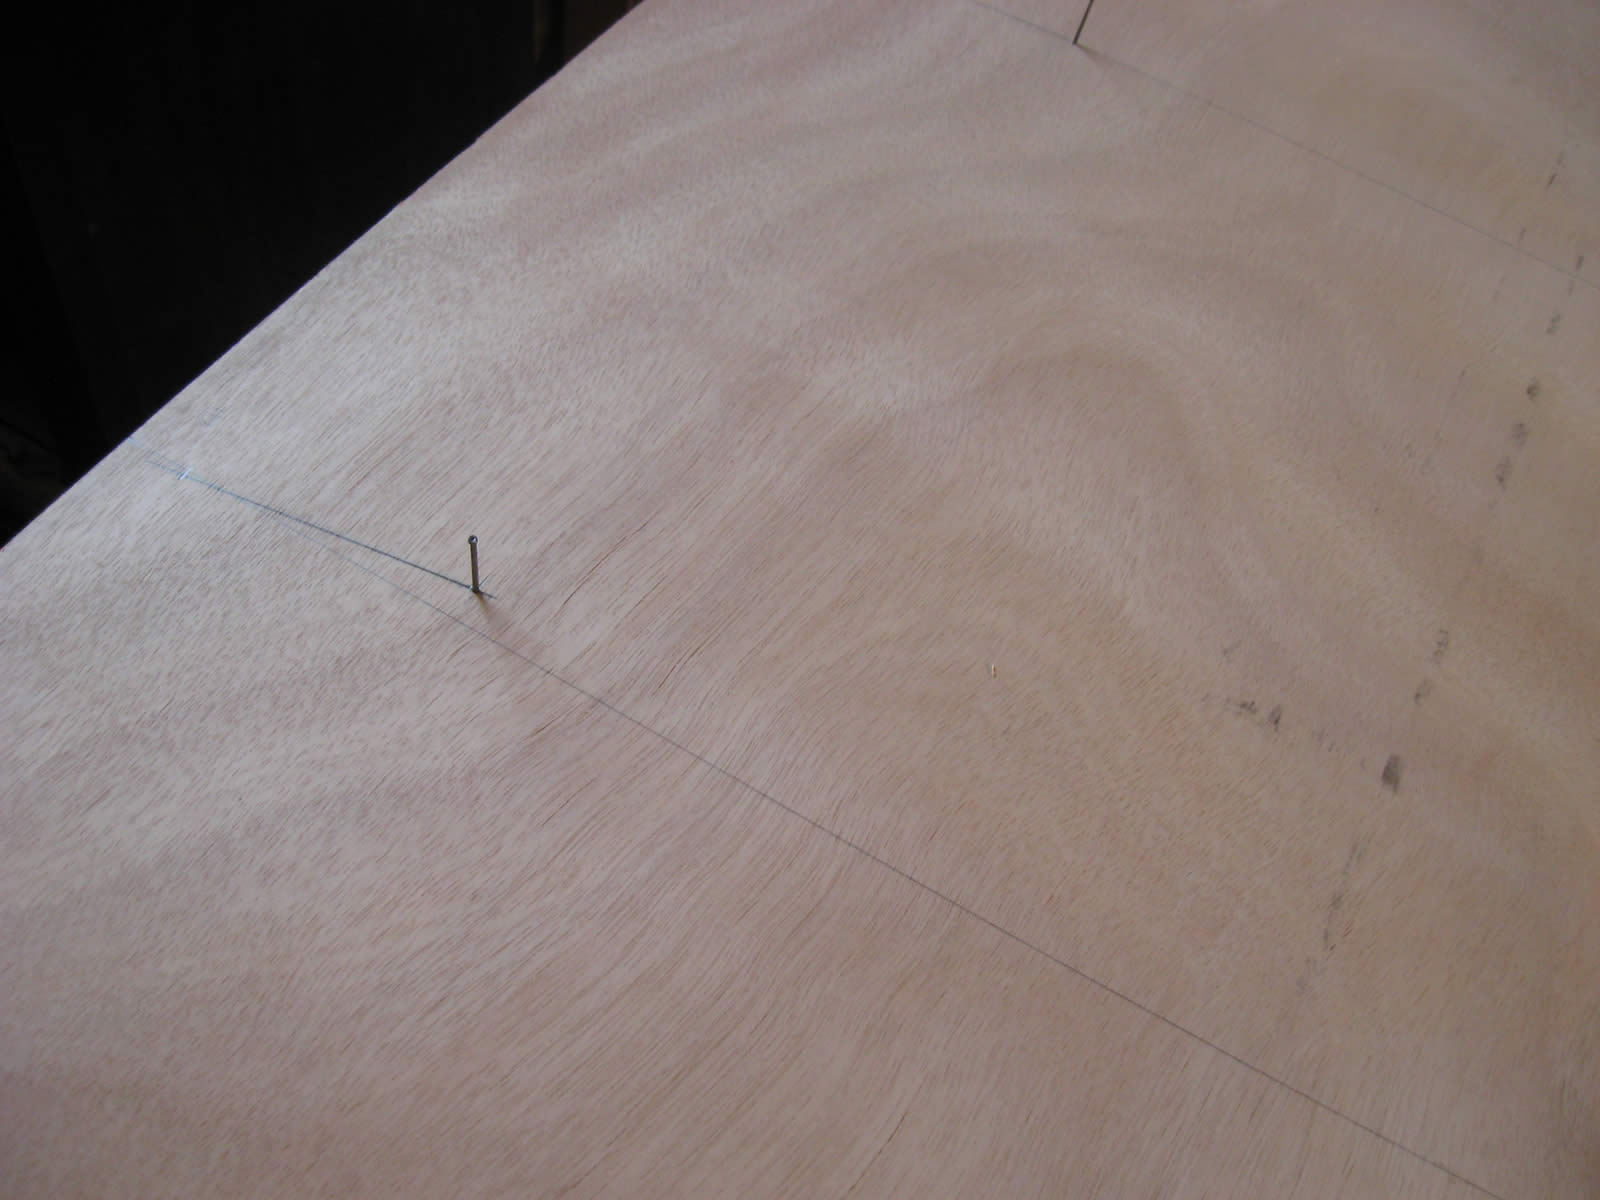 Lines laid out, nails at offset points.